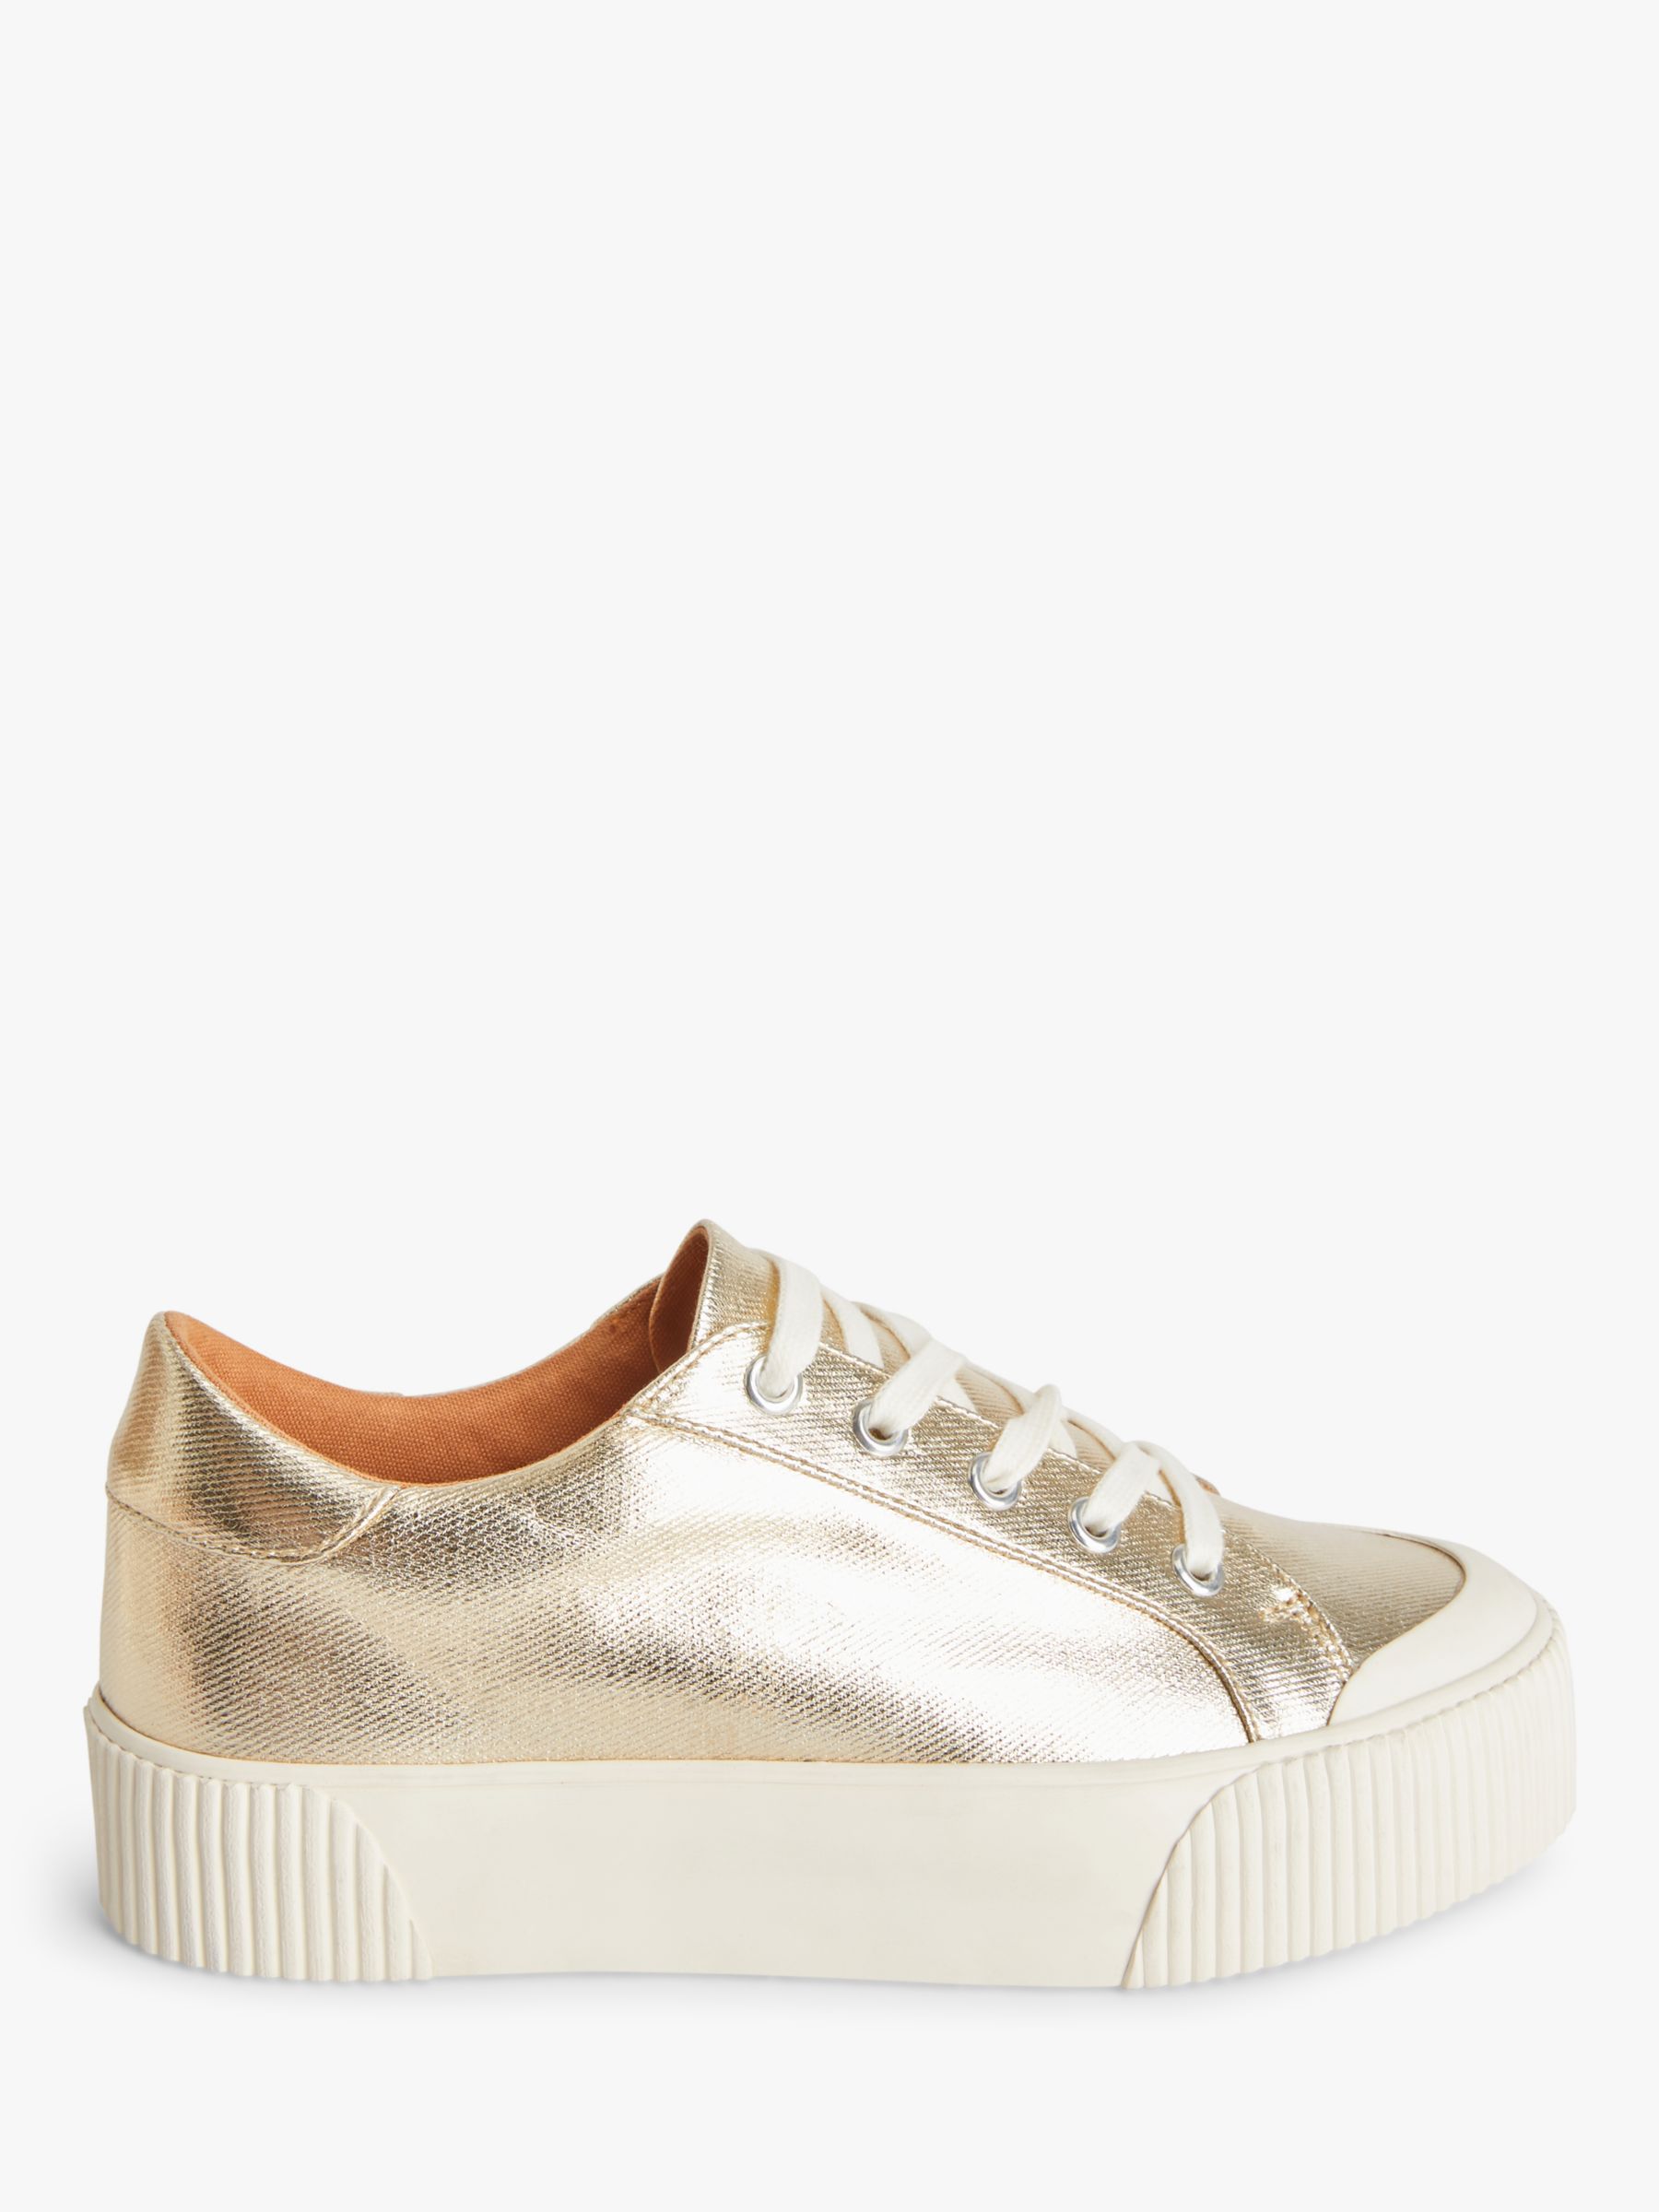 AND/OR Eloisa Flatform Metallic Lace Up Trainers, Gold at John Lewis ...